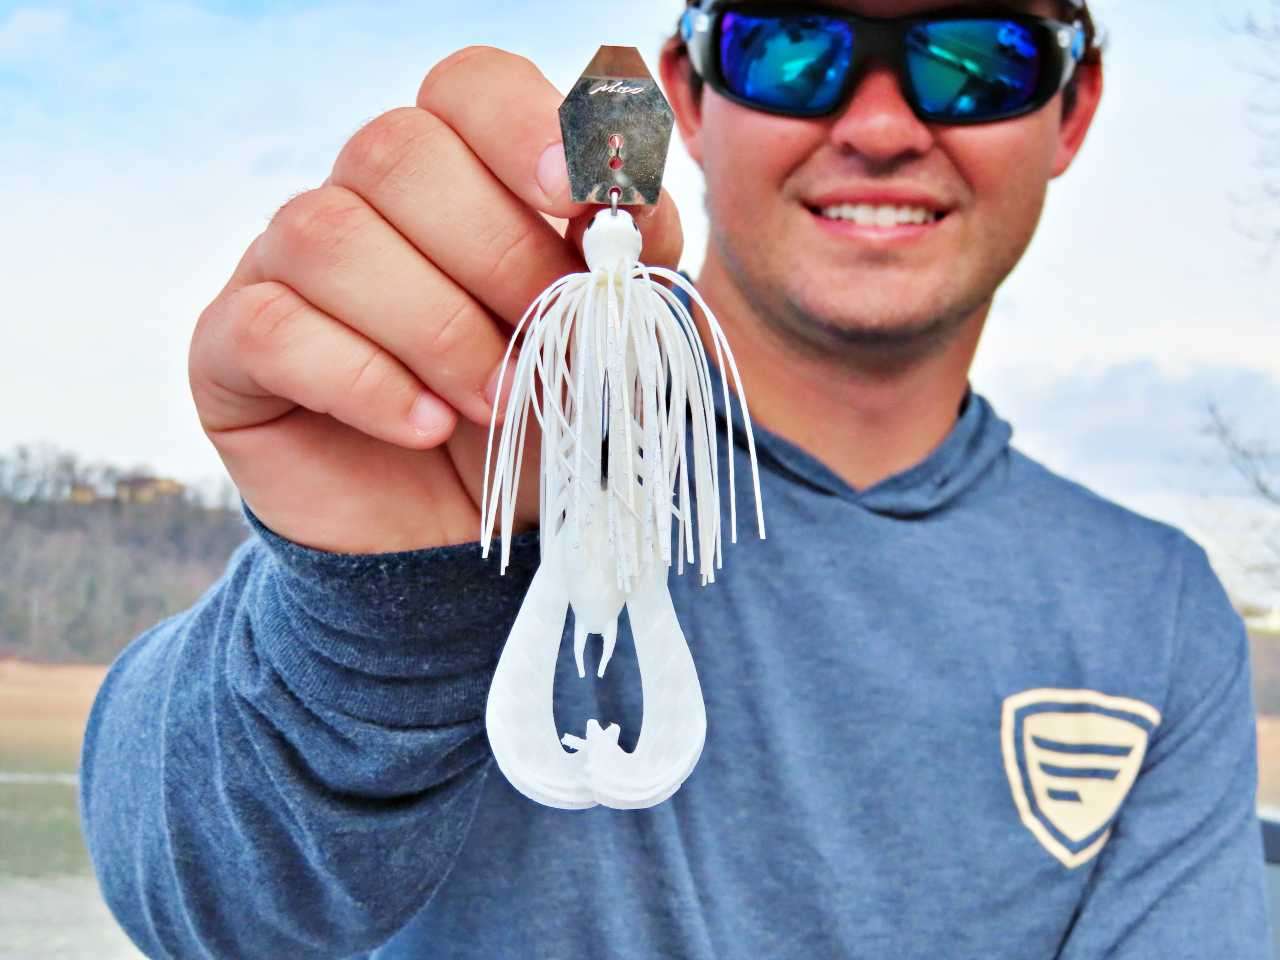 A Z-Man Evergreen ChatterBait Jack Hammer is his choice. âDuring the spawning cycle, and especially during prespawn, this bait is capable of finding bass at any depth.â 
